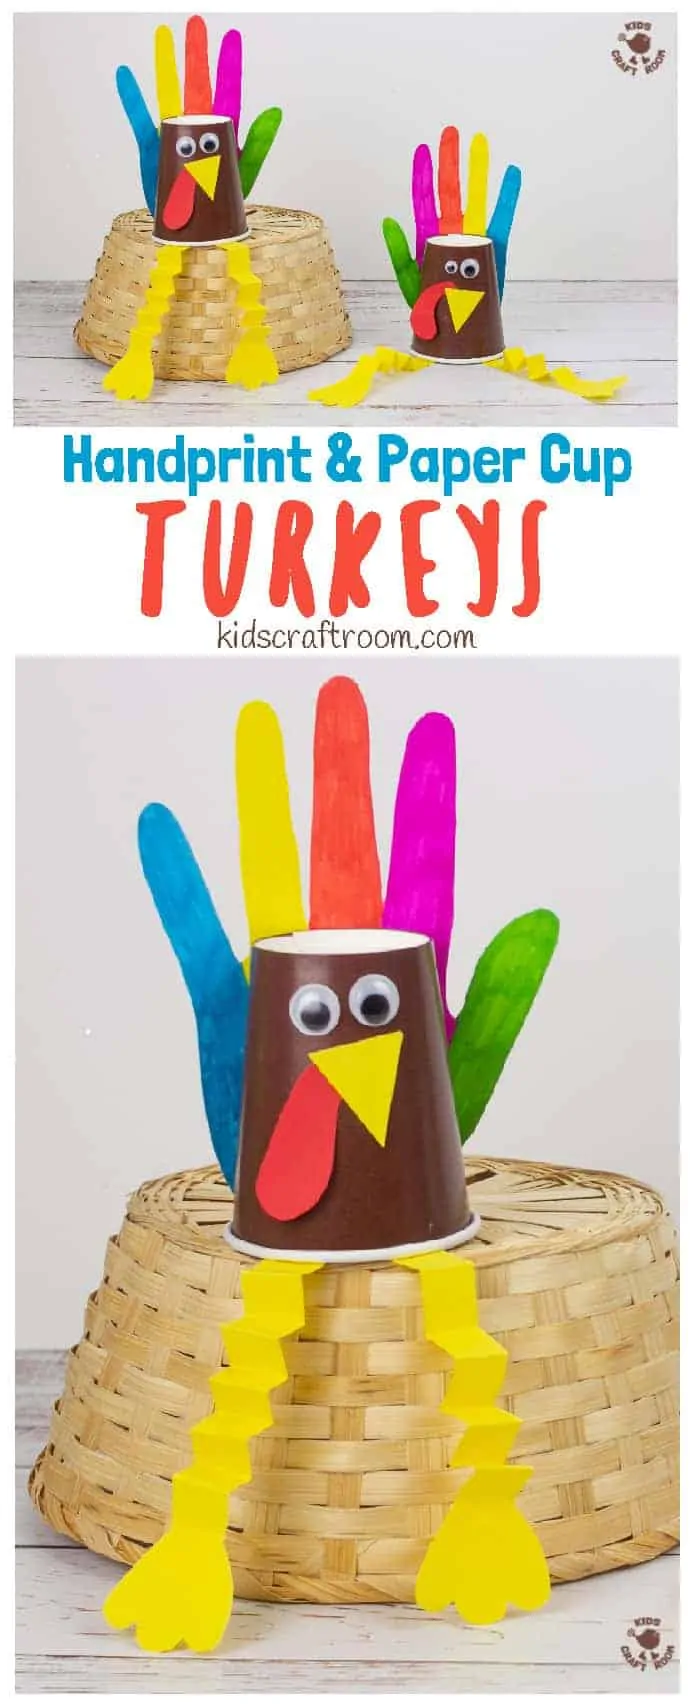 Handprint and paper cup turkey